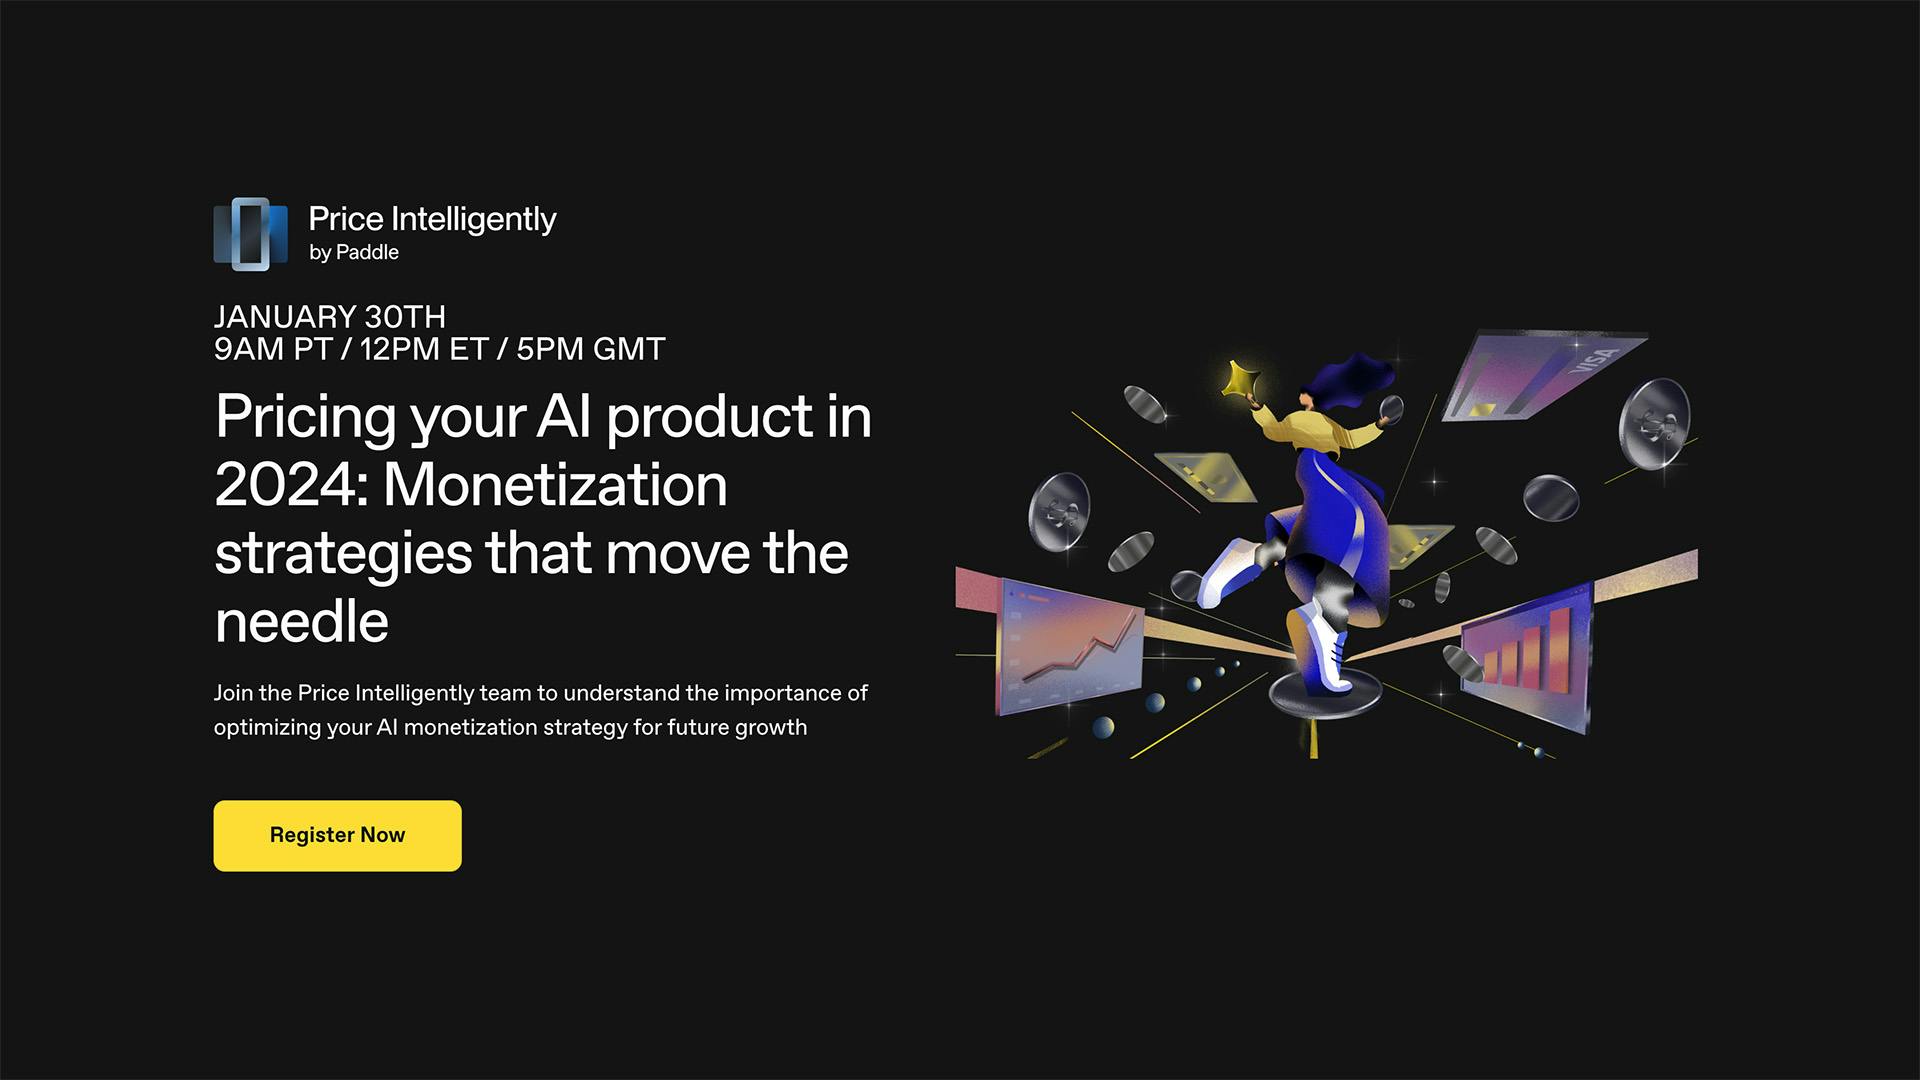 Pricing your A.I. product in 2024: Monetization strategies that move the needle